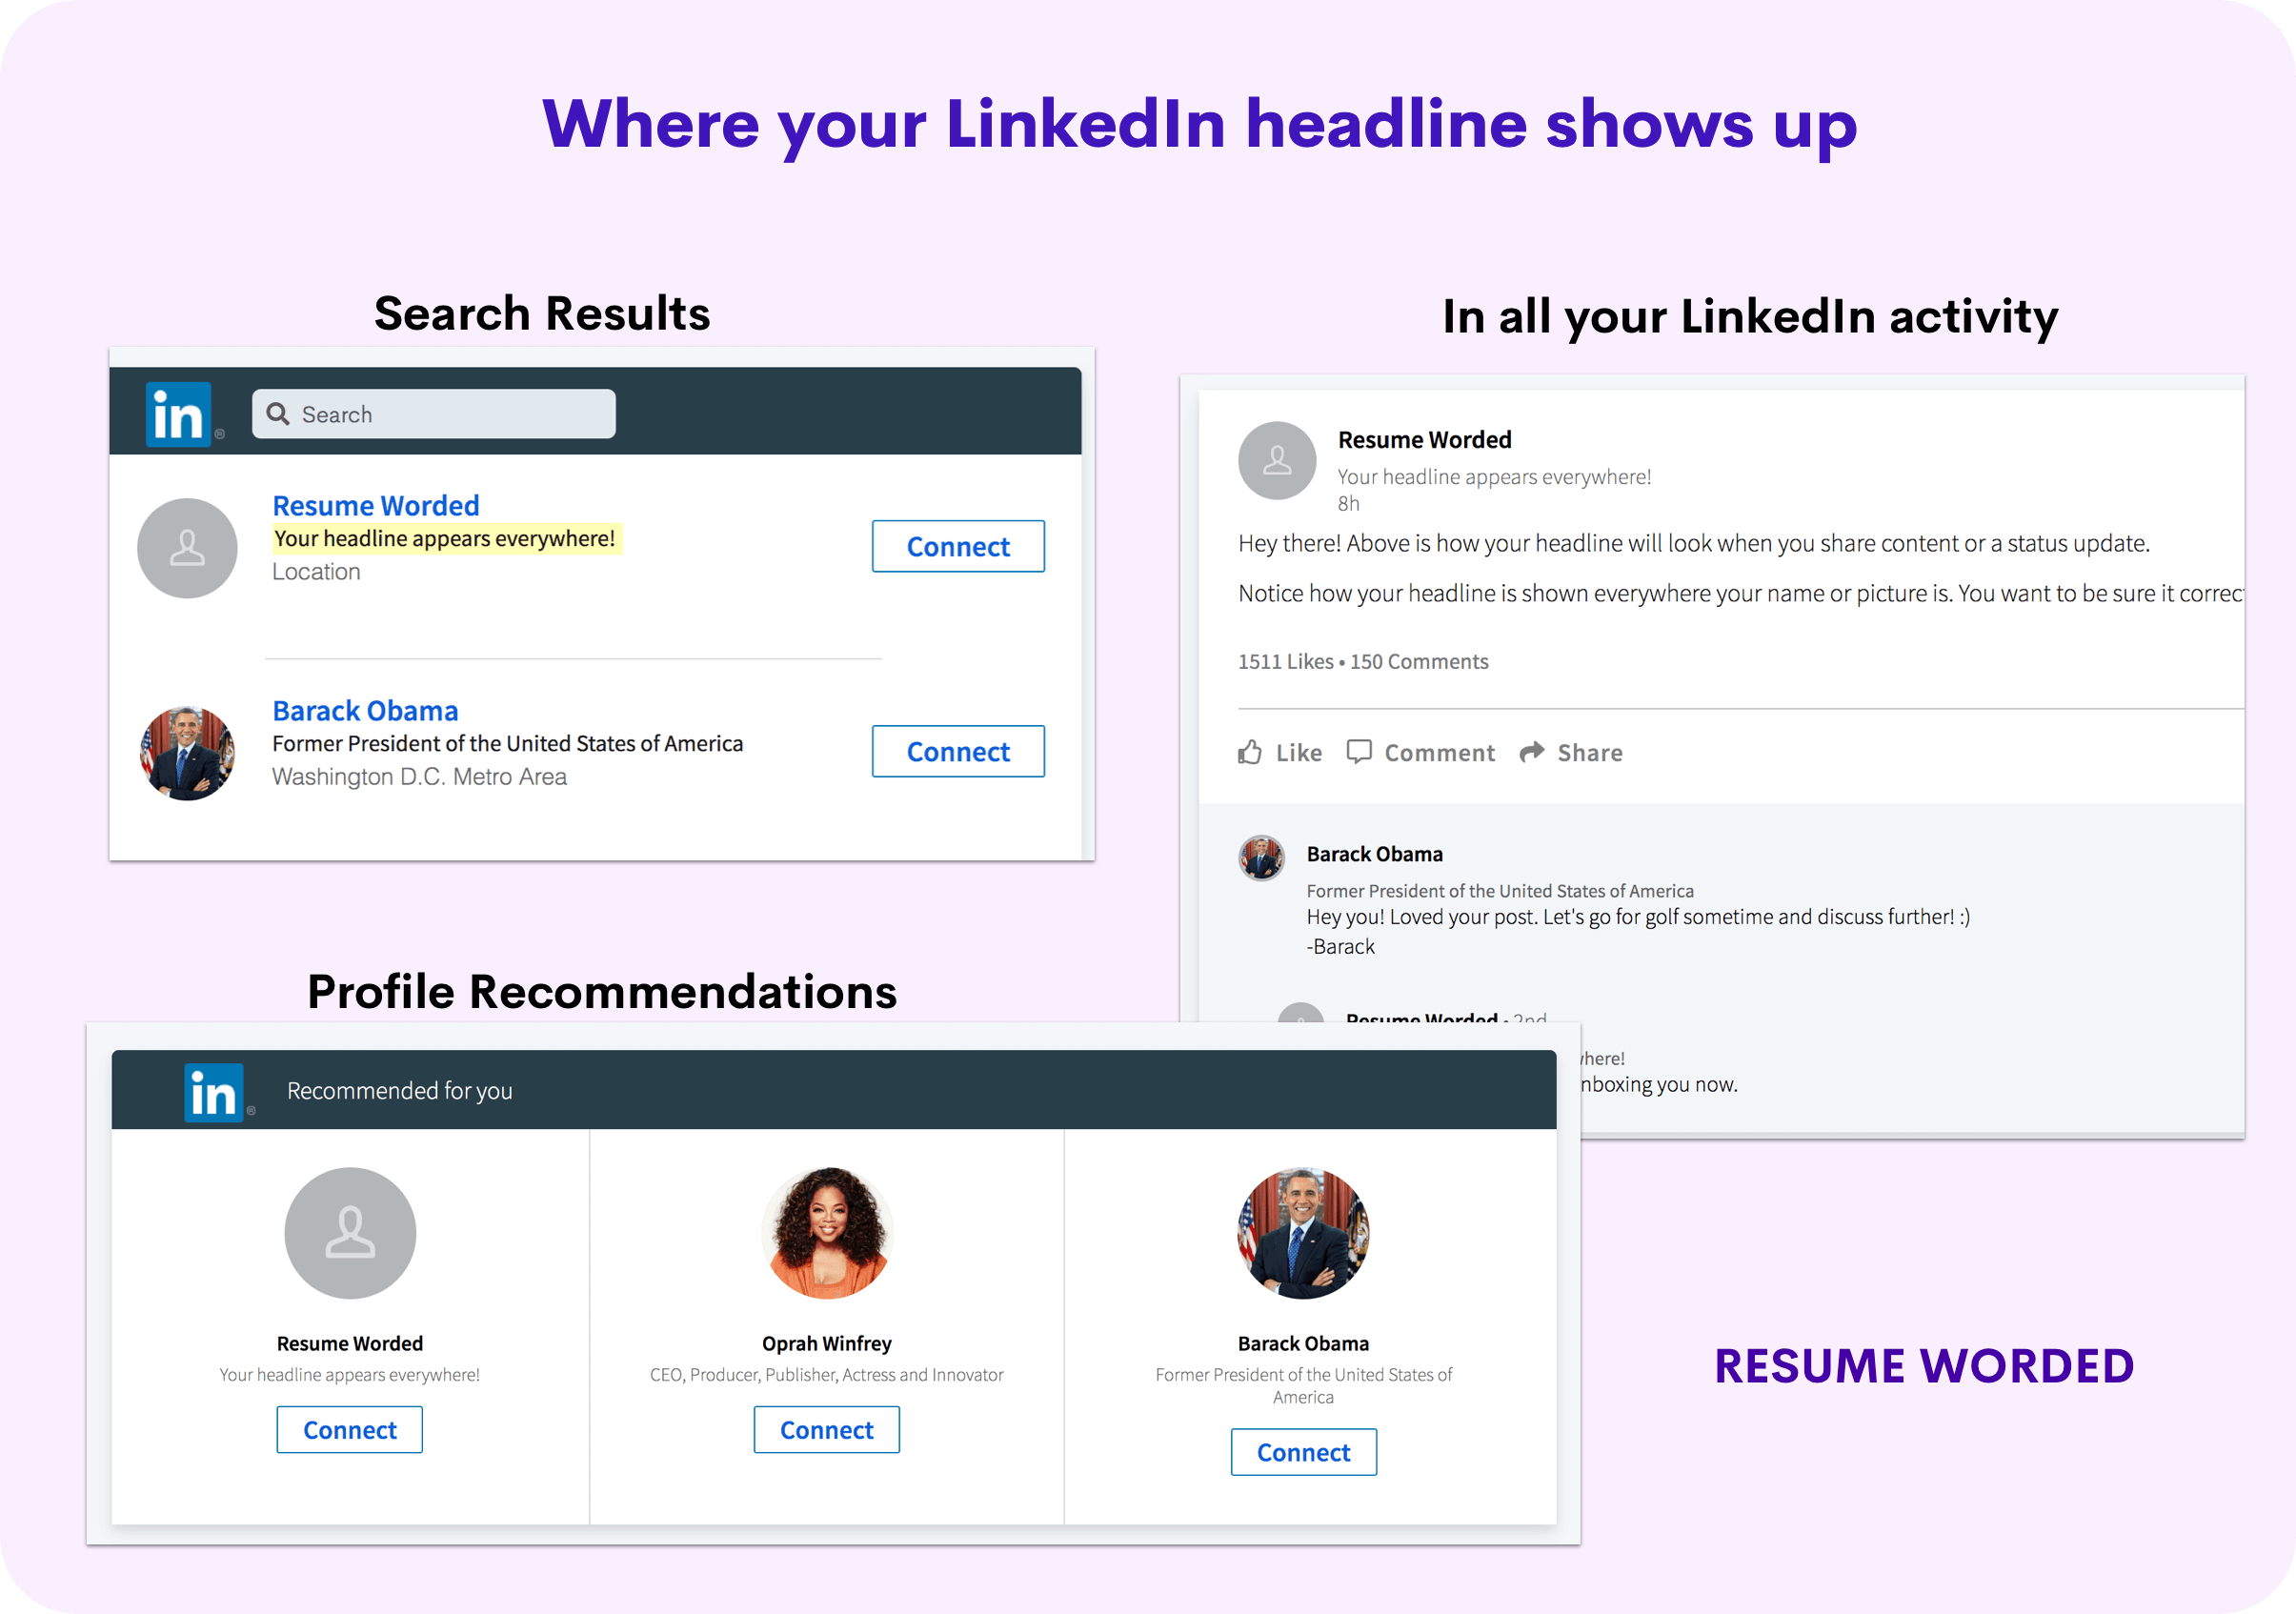 Your LinkedIn headline appears everywhere on LinkedIn, including on search results and your LinkedIn activity